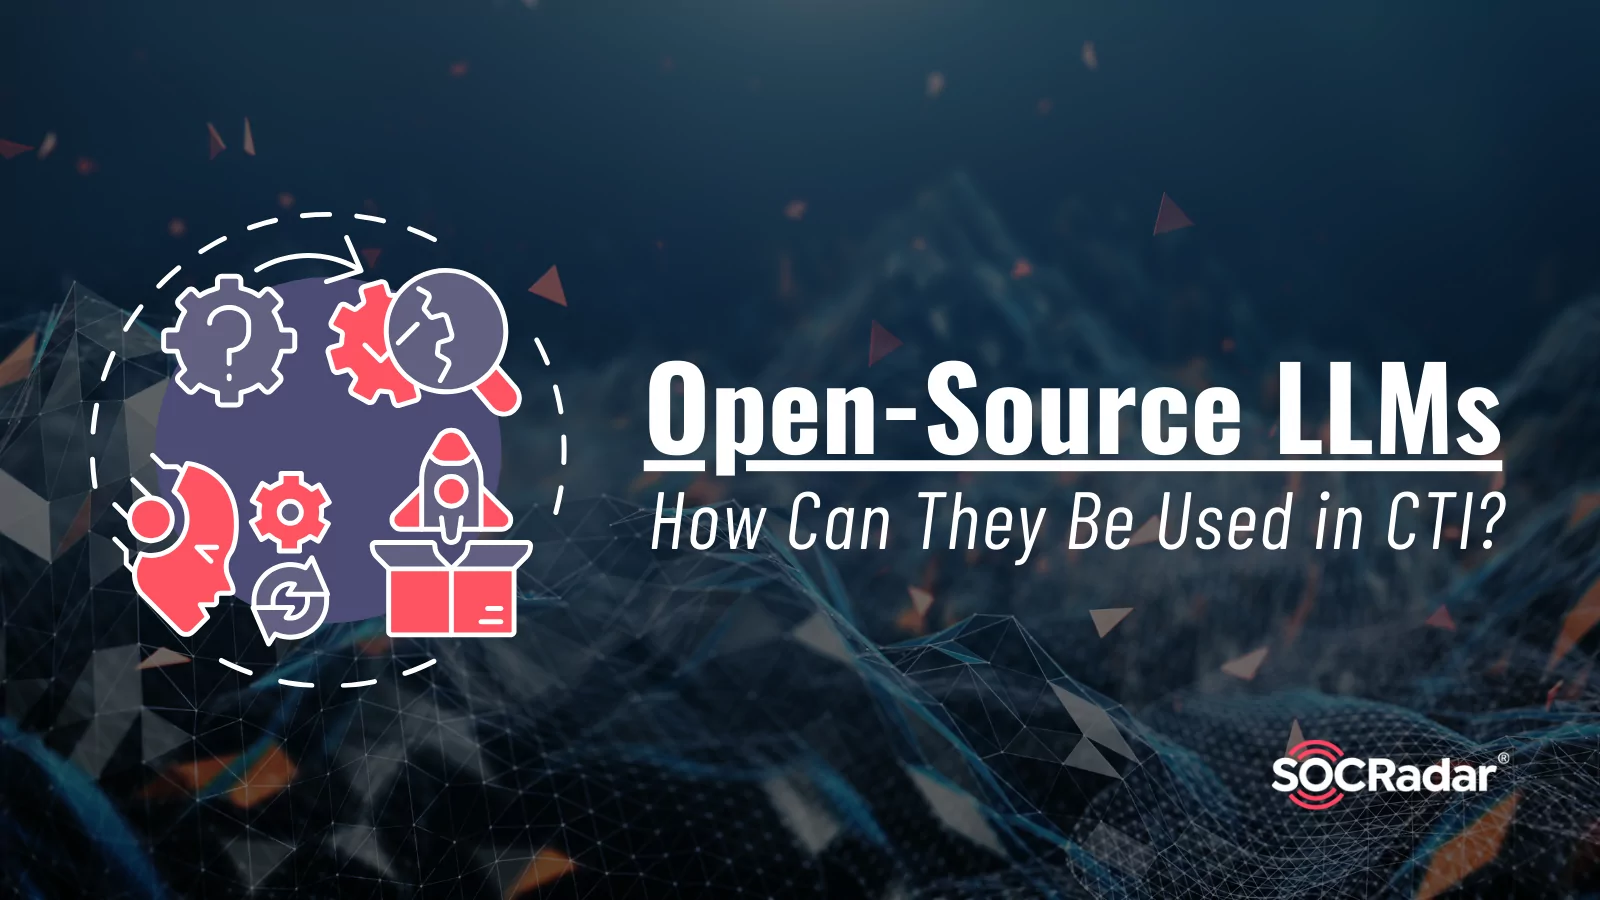 SOCRadar® Cyber Intelligence Inc. | How Can Open-Source LLMs Be Used in CTI?